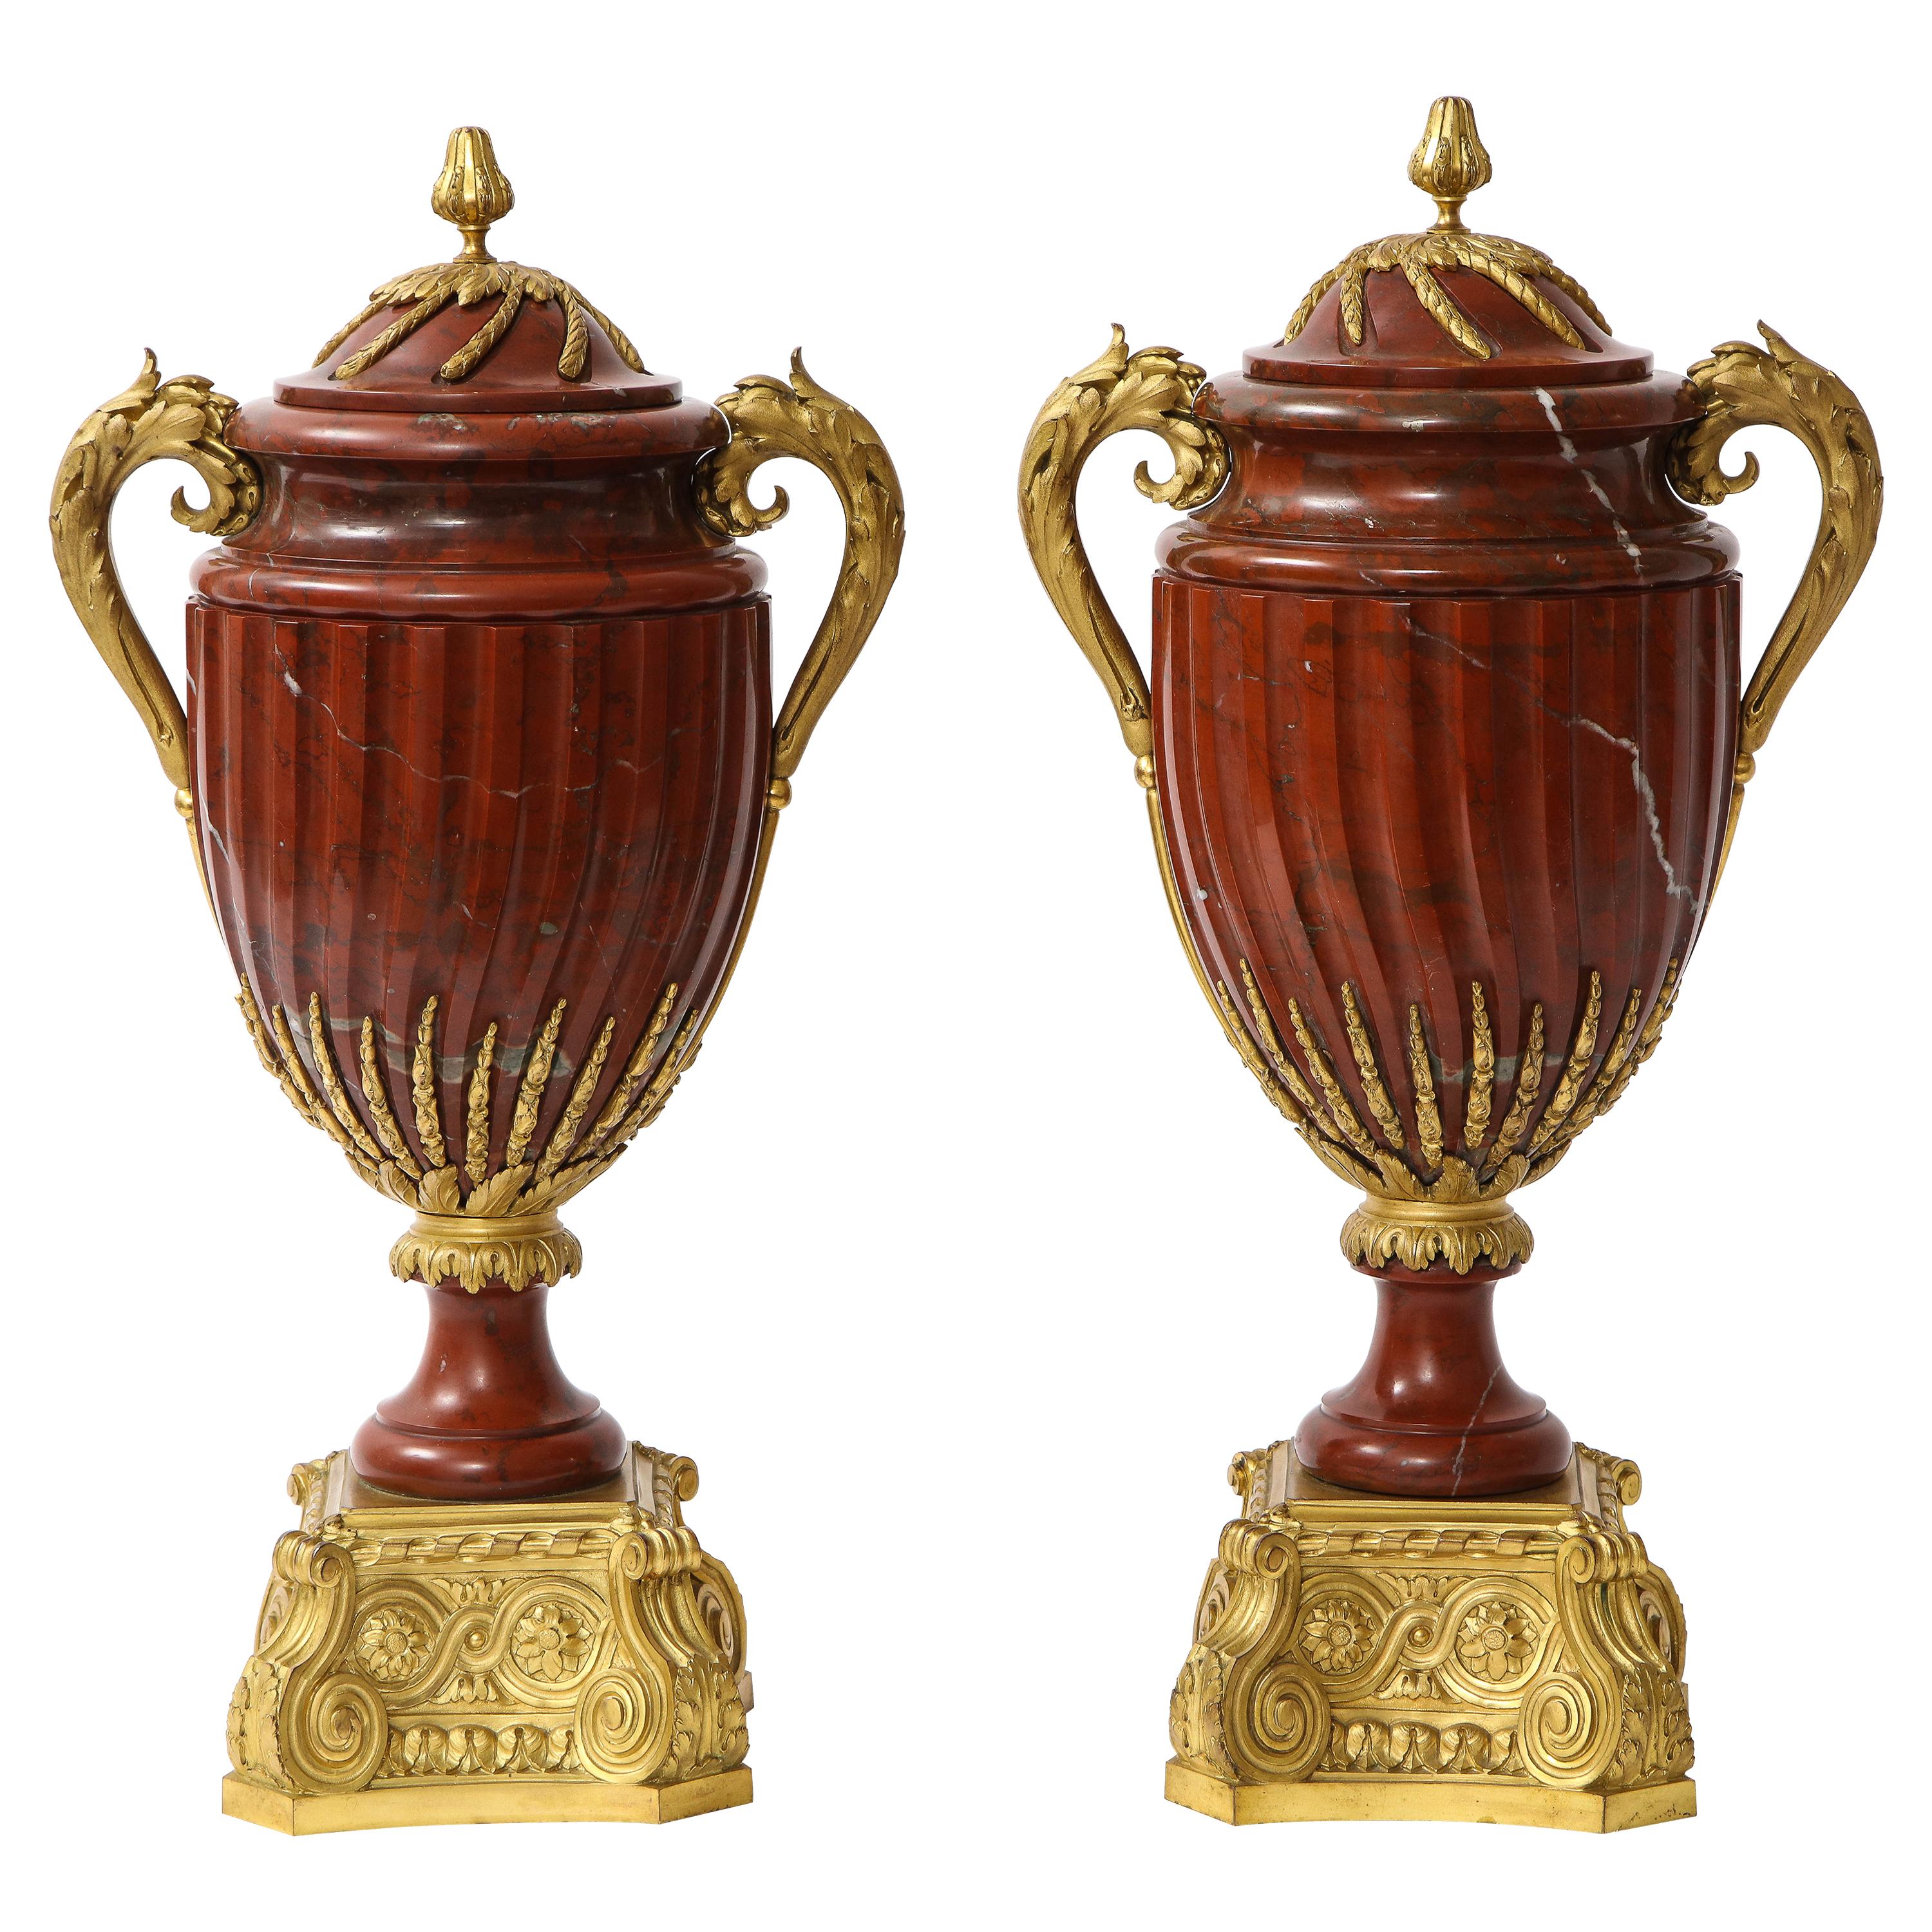 Pair of French Ormolu Mounted Rouge Marble Covered Vases, Signed Maison Boudet